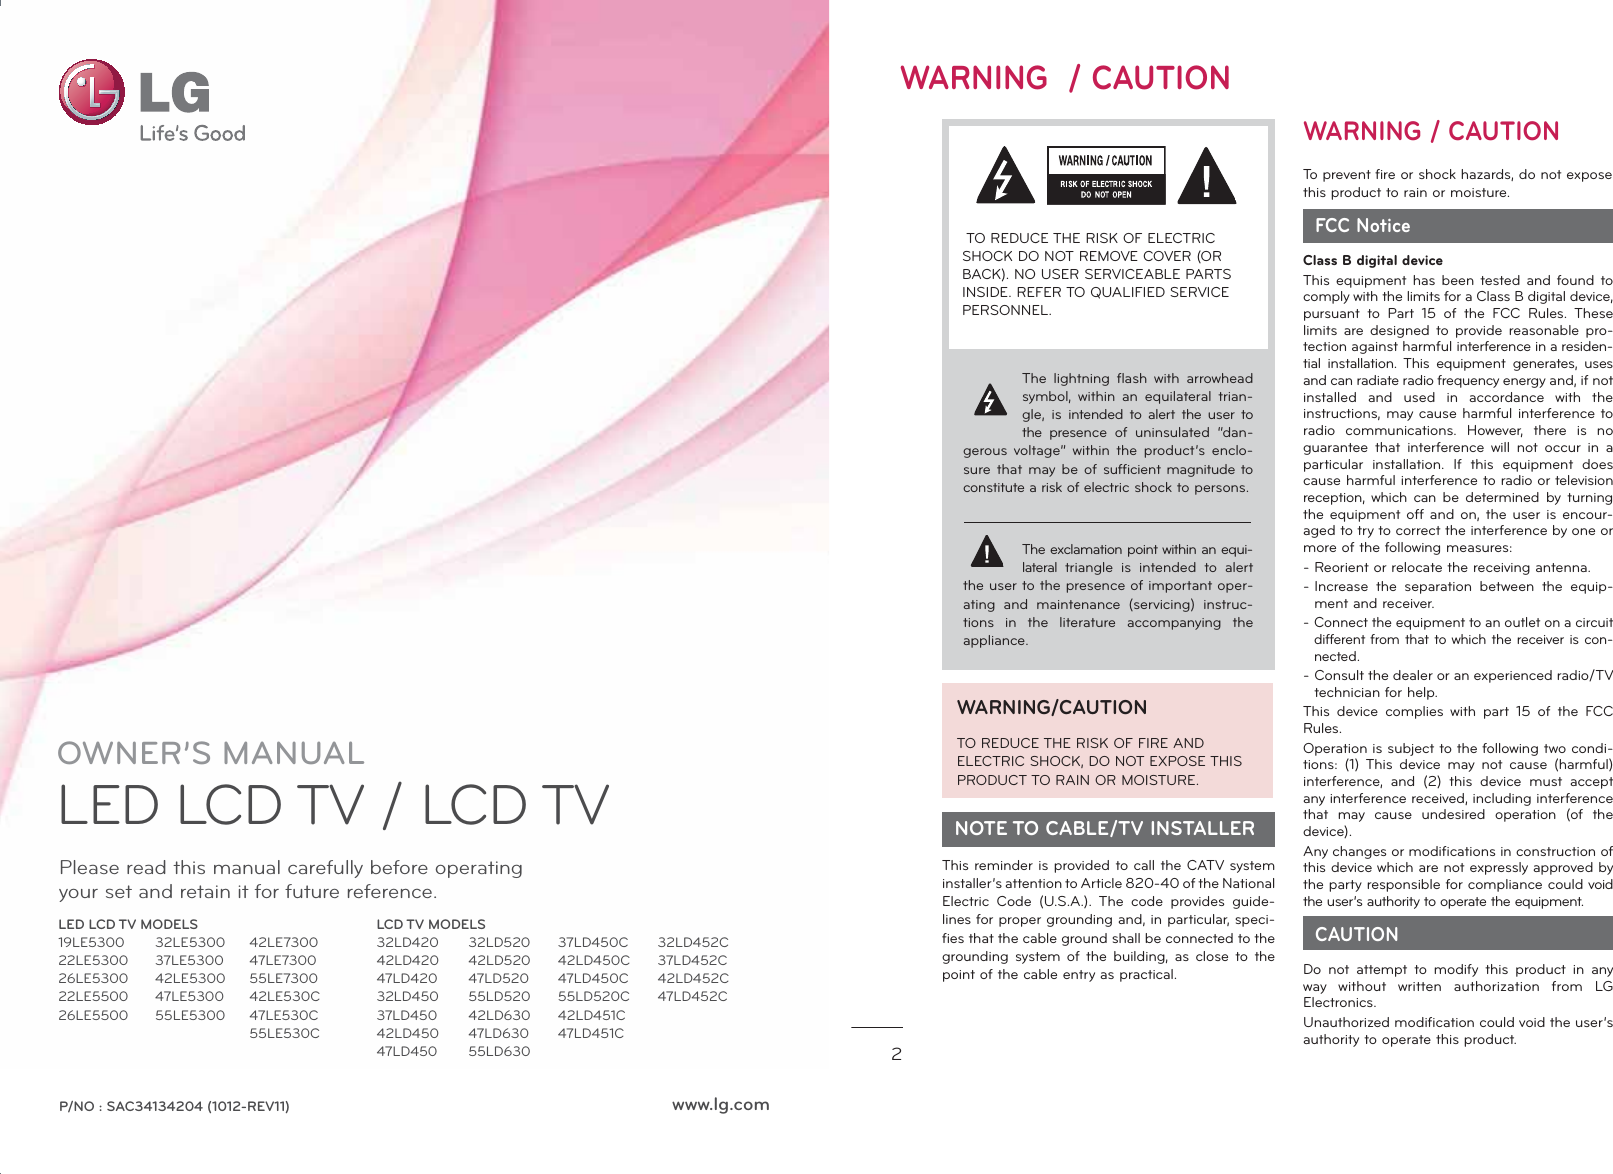 OWNER’S MANUALLED LCD TV / LCD TV Please read this manual carefully before operatingyour set and retain it for future reference.P/NO : SAC34134204 (1012-REV11) www.lg.comLED LCD TV MODELS19LE530022LE530026LE530022LE550026LE550032LE530037LE530042LE530047LE530055LE530042LE730047LE730055LE730042LE530C47LE530C55LE530CLCD TV MODELS32LD42042LD42047LD42032LD45037LD45042LD45047LD45037LD450C42LD450C47LD450C55LD520C42LD451C47LD451C32LD52042LD52047LD52055LD52042LD63047LD63055LD63032LD452C37LD452C42LD452C47LD452C2WARNING  / CAUTIONThe lightning flash with arrowhead symbol, within an equilateral trian-gle, is intended to alert the user to the presence of uninsulated “dan-gerous voltage” within the product’s enclo-sure that may be of sufficient magnitude to constitute a risk of electric shock to persons.The exclamation point within an equi-lateral triangle is intended to alert the user to the presence of important oper-ating and maintenance (servicing) instruc-tions in the literature accompanying the appliance. TO REDUCE THE RISK OF ELECTRIC SHOCK DO NOT REMOVE COVER (OR BACK). NO USER SERVICEABLE PARTS INSIDE. REFER TO QUALIFIED SERVICE PERSONNEL.WARNING/CAUTION TO REDUCE THE RISK OF FIRE AND ELECTRIC SHOCK, DO NOT EXPOSE THIS PRODUCT TO RAIN OR MOISTURE.  NOTE TO CABLE/TV INSTALLERThis reminder is provided to call the CATV system installer’s attention to Article 820-40 of the National Electric Code (U.S.A.). The code provides guide-lines for proper grounding and, in particular, speci-fies that the cable ground shall be connected to the grounding system of the building, as close to the point of the cable entry as practical.WARNING / CAUTIONTo prevent fire or shock hazards, do not expose this product to rain or moisture.  FCC NoticeClass B digital deviceThis equipment has been tested and found to comply with the limits for a Class B digital device, pursuant to Part 15 of the FCC Rules. These limits are designed to provide reasonable pro-tection against harmful interference in a residen-tial installation. This equipment  generates, uses and can radiate radio frequency energy and, if not installed and used in accordance with the instructions, may cause harmful interference to radio communications. However, there is no guarantee that interference will not occur in a particular installation. If this equipment does cause harmful interference to radio or television reception, which can be determined by turning the equipment off and on, the user is encour-aged to try to correct the interference by one or more of the following measures:- Reorient or relocate the receiving antenna.-  Increase the separation between the equip-ment and receiver.-  Connect the equipment to an outlet on a circuit different from that to which the receiver is con-nected.-  Consult the dealer or an experienced radio/TV technician for help.This device complies with part 15 of the FCC Rules.Operation is subject to the following two condi-tions: (1) This device may not cause (harmful) interference, and (2) this device must accept any interference received, including interference that may cause undesired operation (of the device).Any changes or modifications in construction of this device which are not expressly approved by the party responsible for compliance could void the user’s authority to operate the equipment.  CAUTIONDo not attempt to modify this product in any way without written authorization from LG Electronics.Unauthorized modification could void the user’s authority to operate this product.